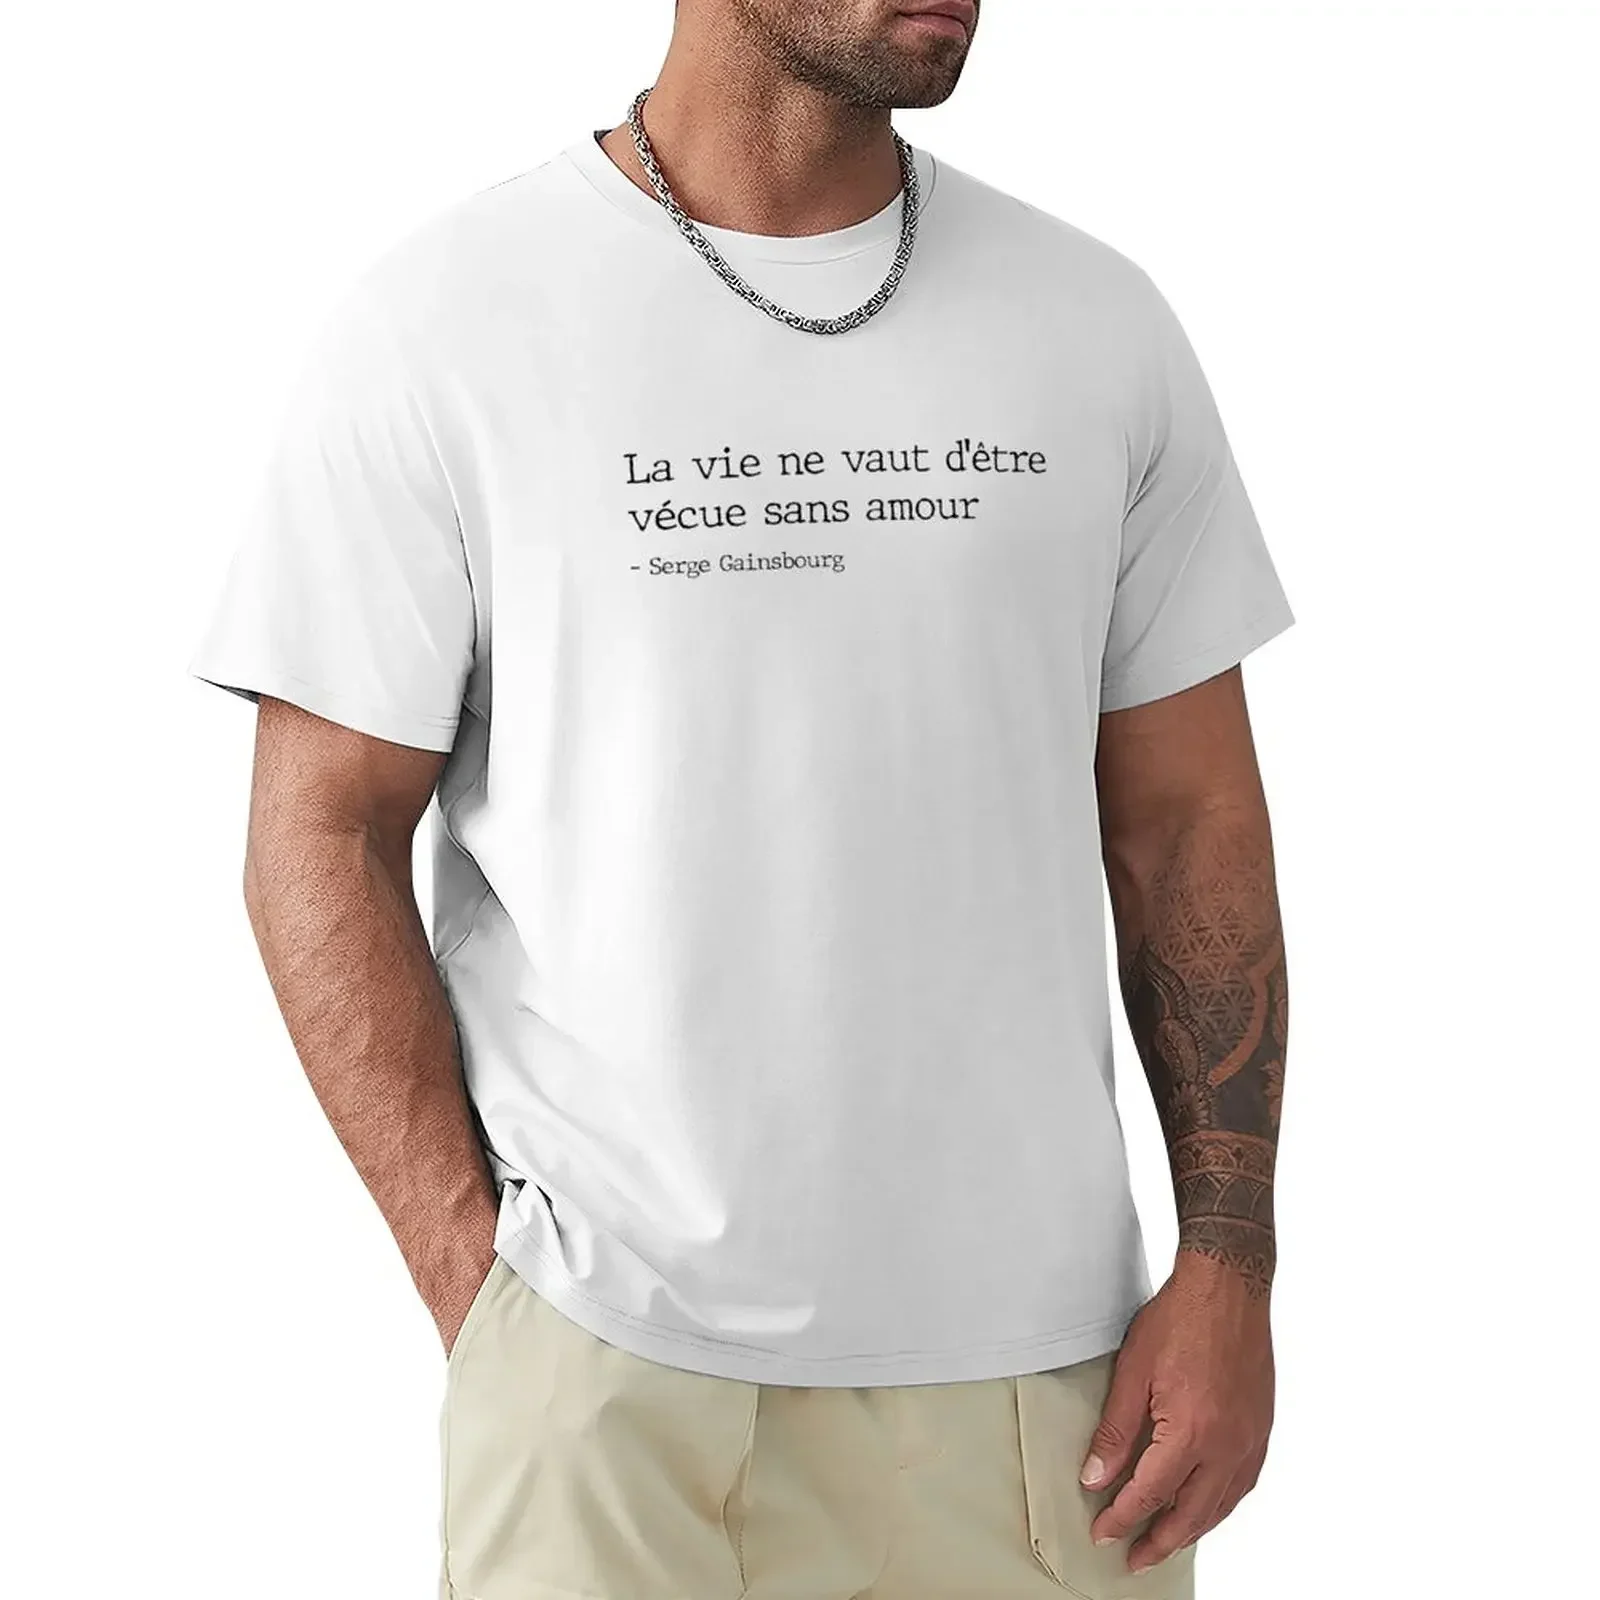 

Serge Gainsbourg - quote T-Shirt anime clothes shirts graphic tees Blouse Men's t shirts